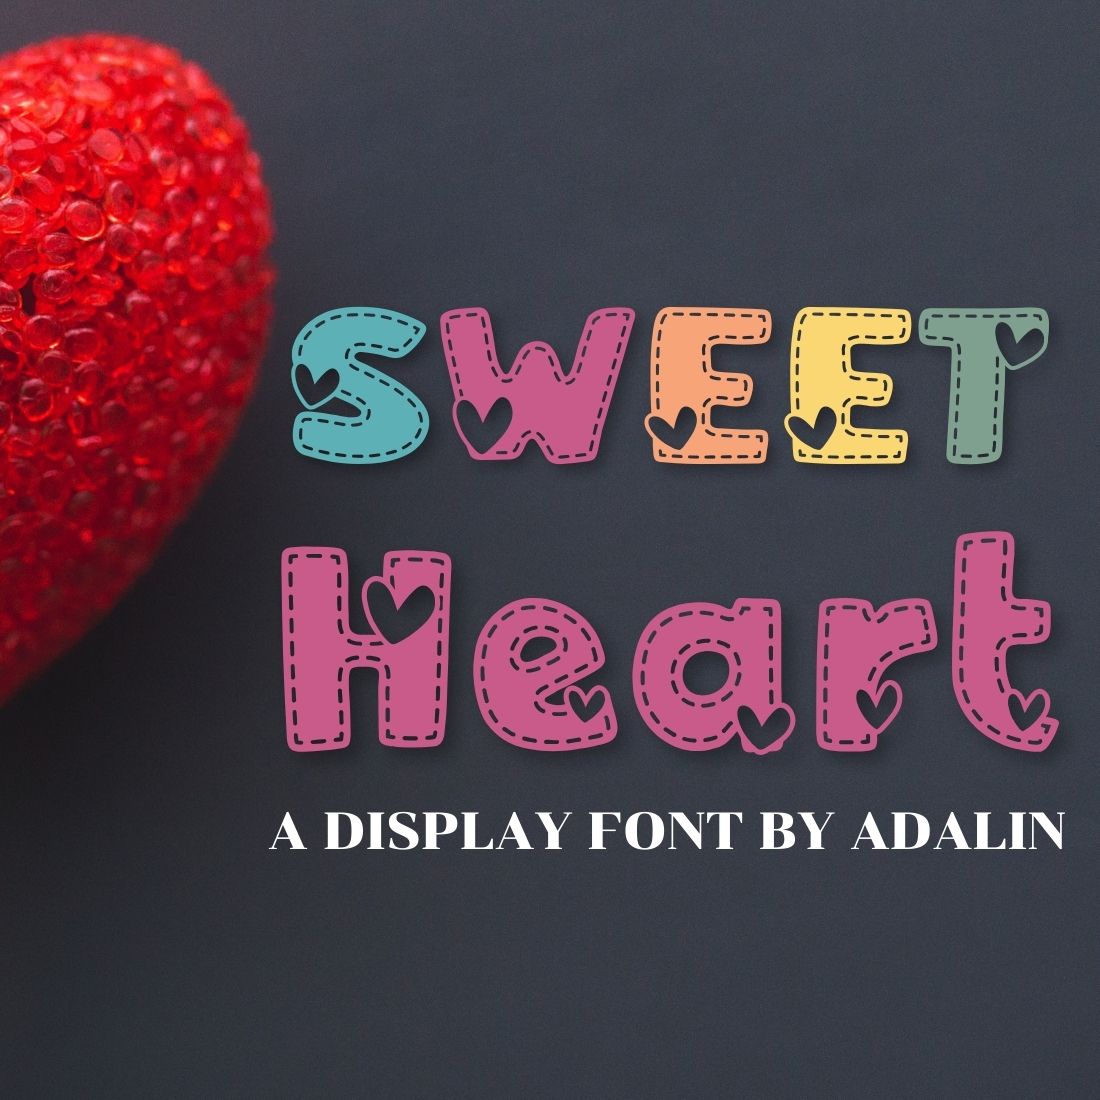 Sweet Heart - Display Font cover image.